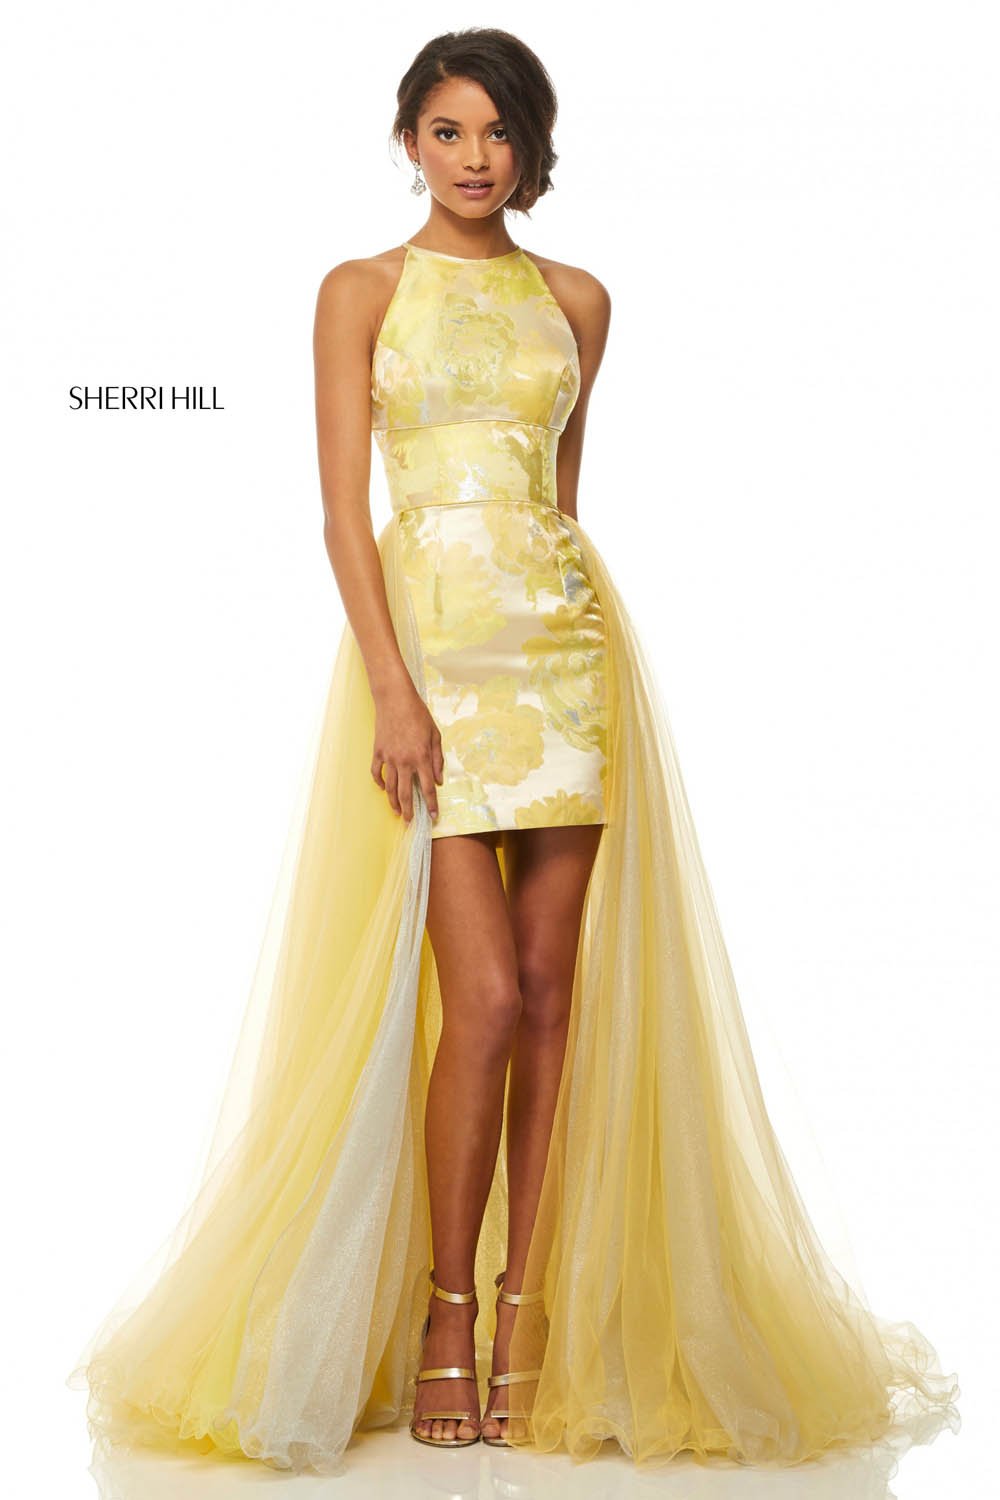 Sherri Hill 52859 dress images in these colors: Yellow Silver Print.